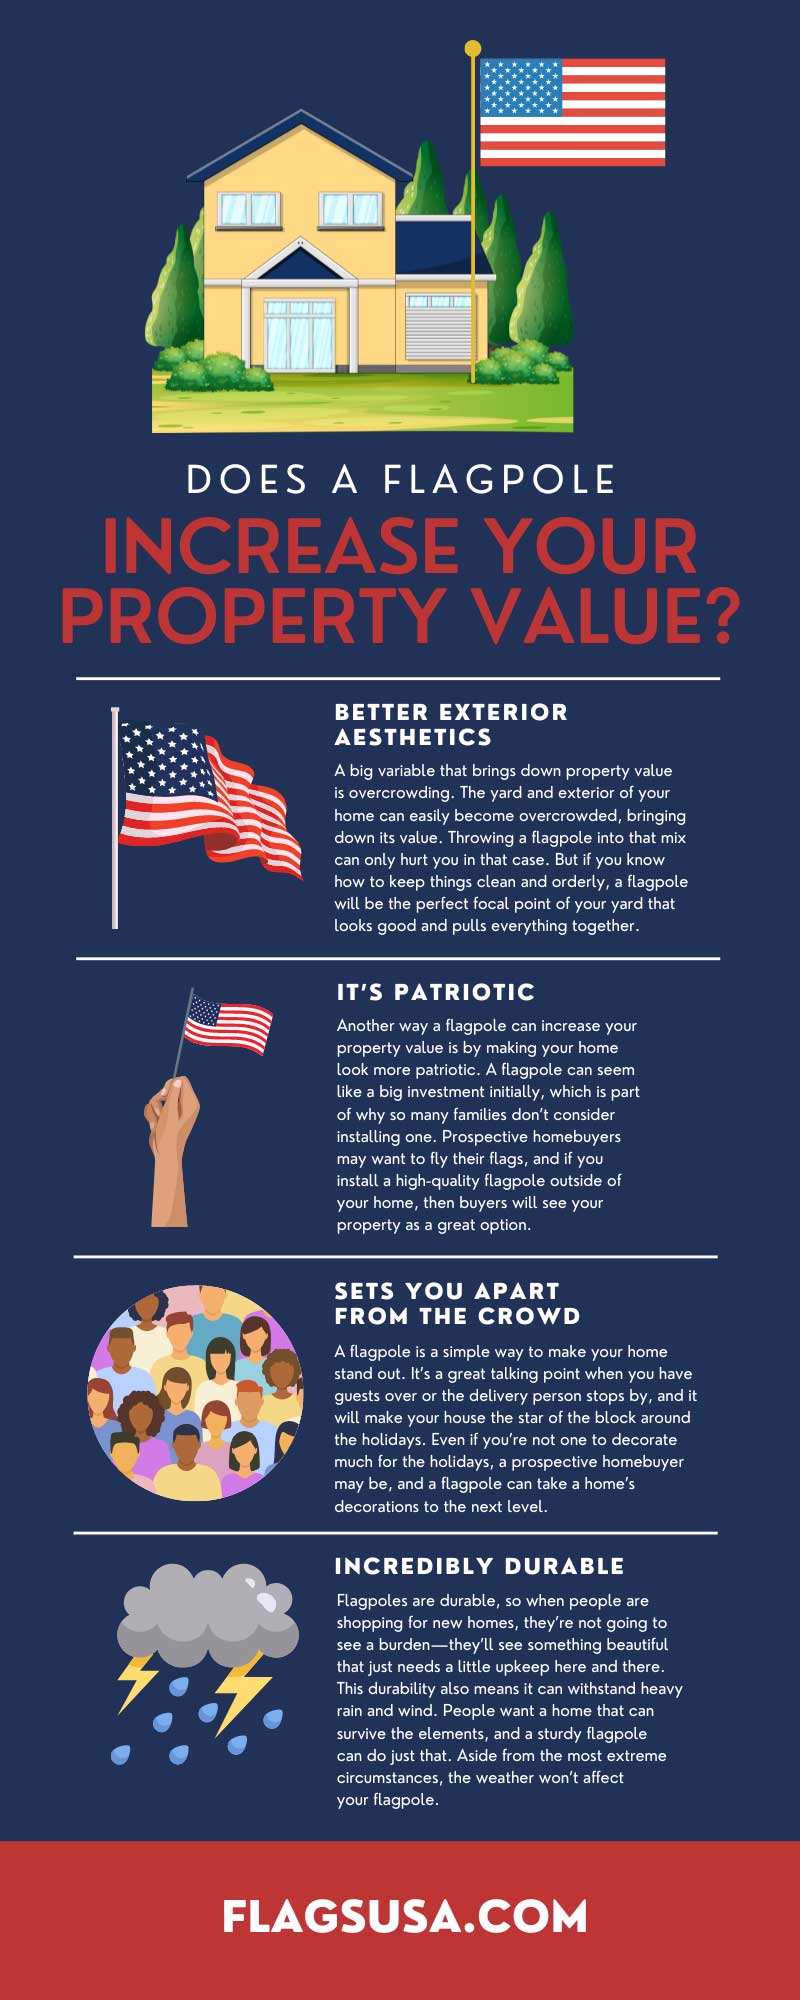 Does a flagpole increase your property value?